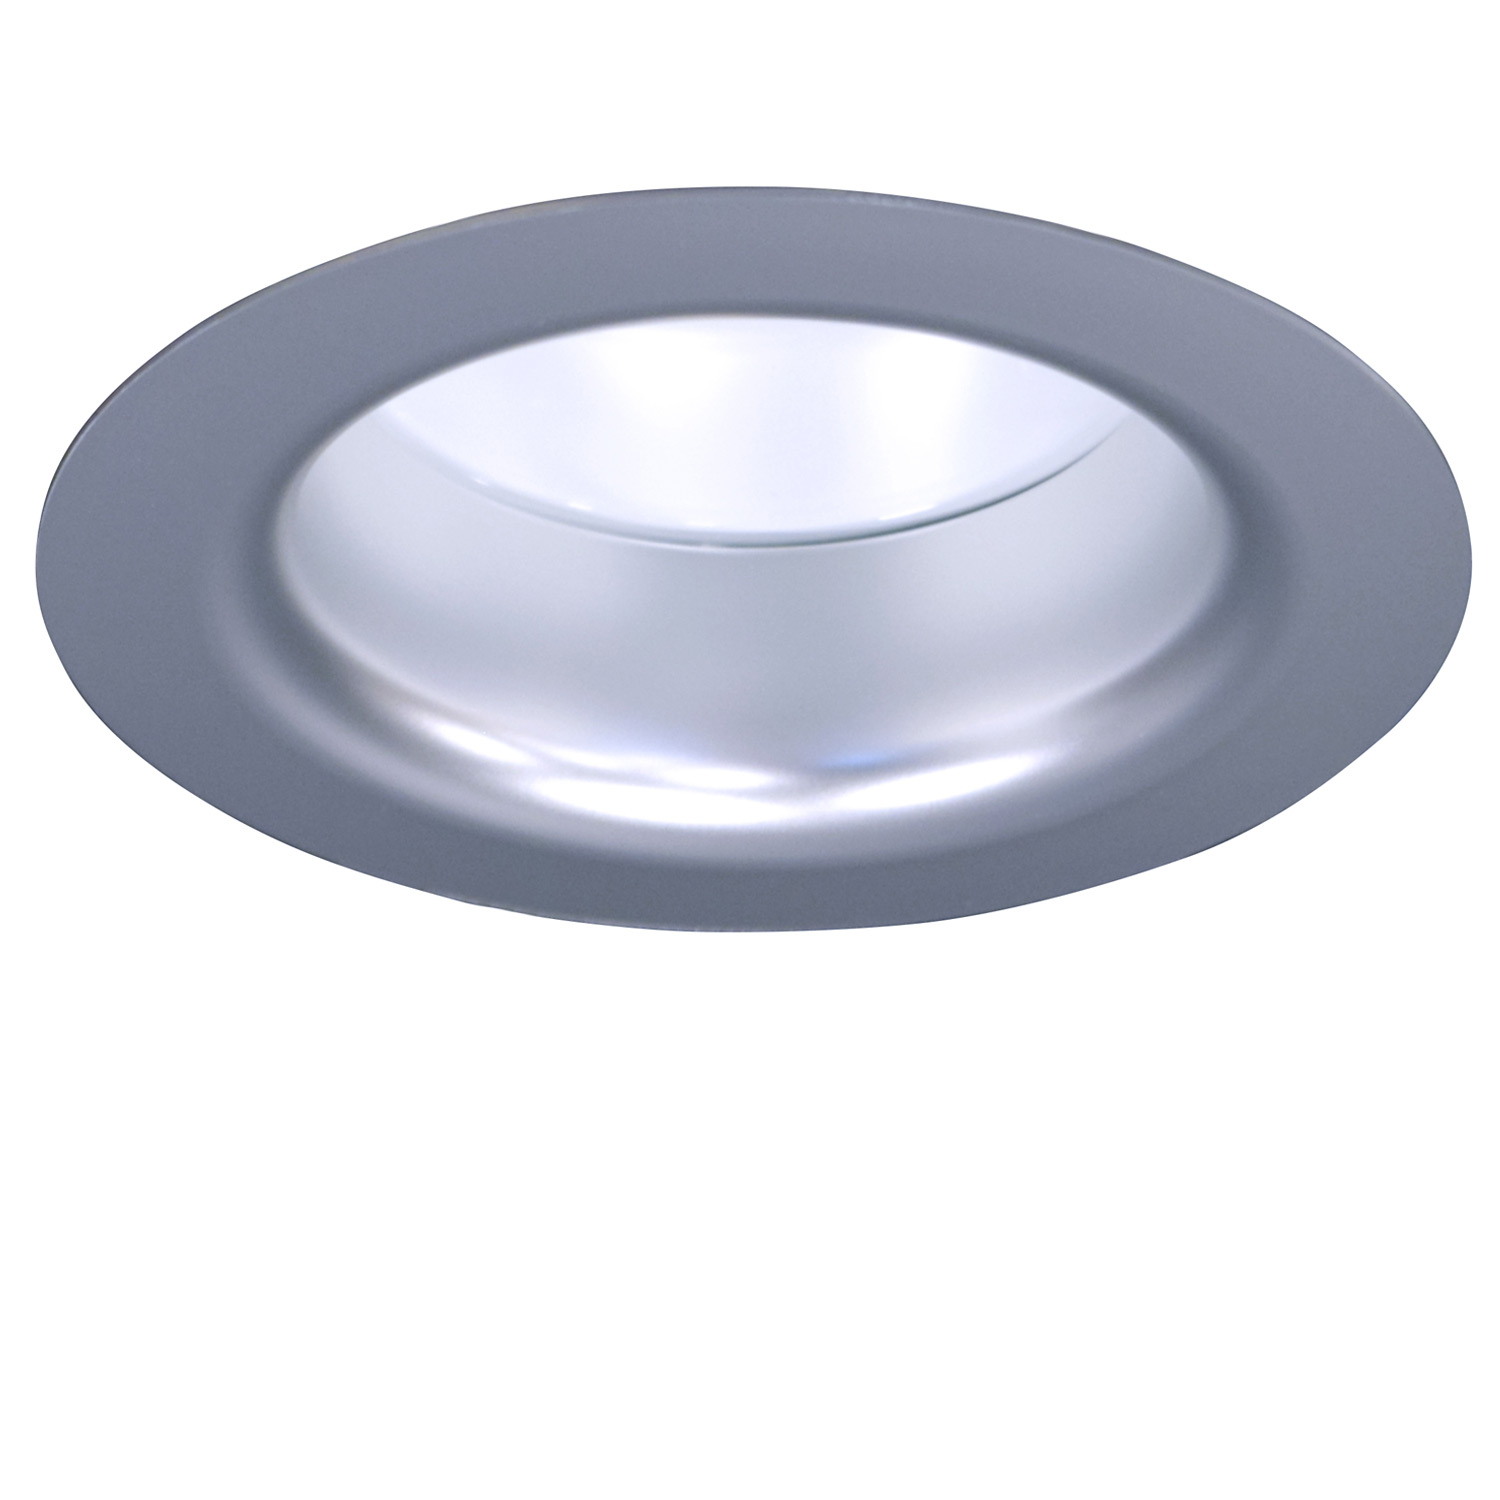 Product image for Two Piece Reflector with Lower Cone and Flat Lens for 6-Inch BIOS LED Downlights